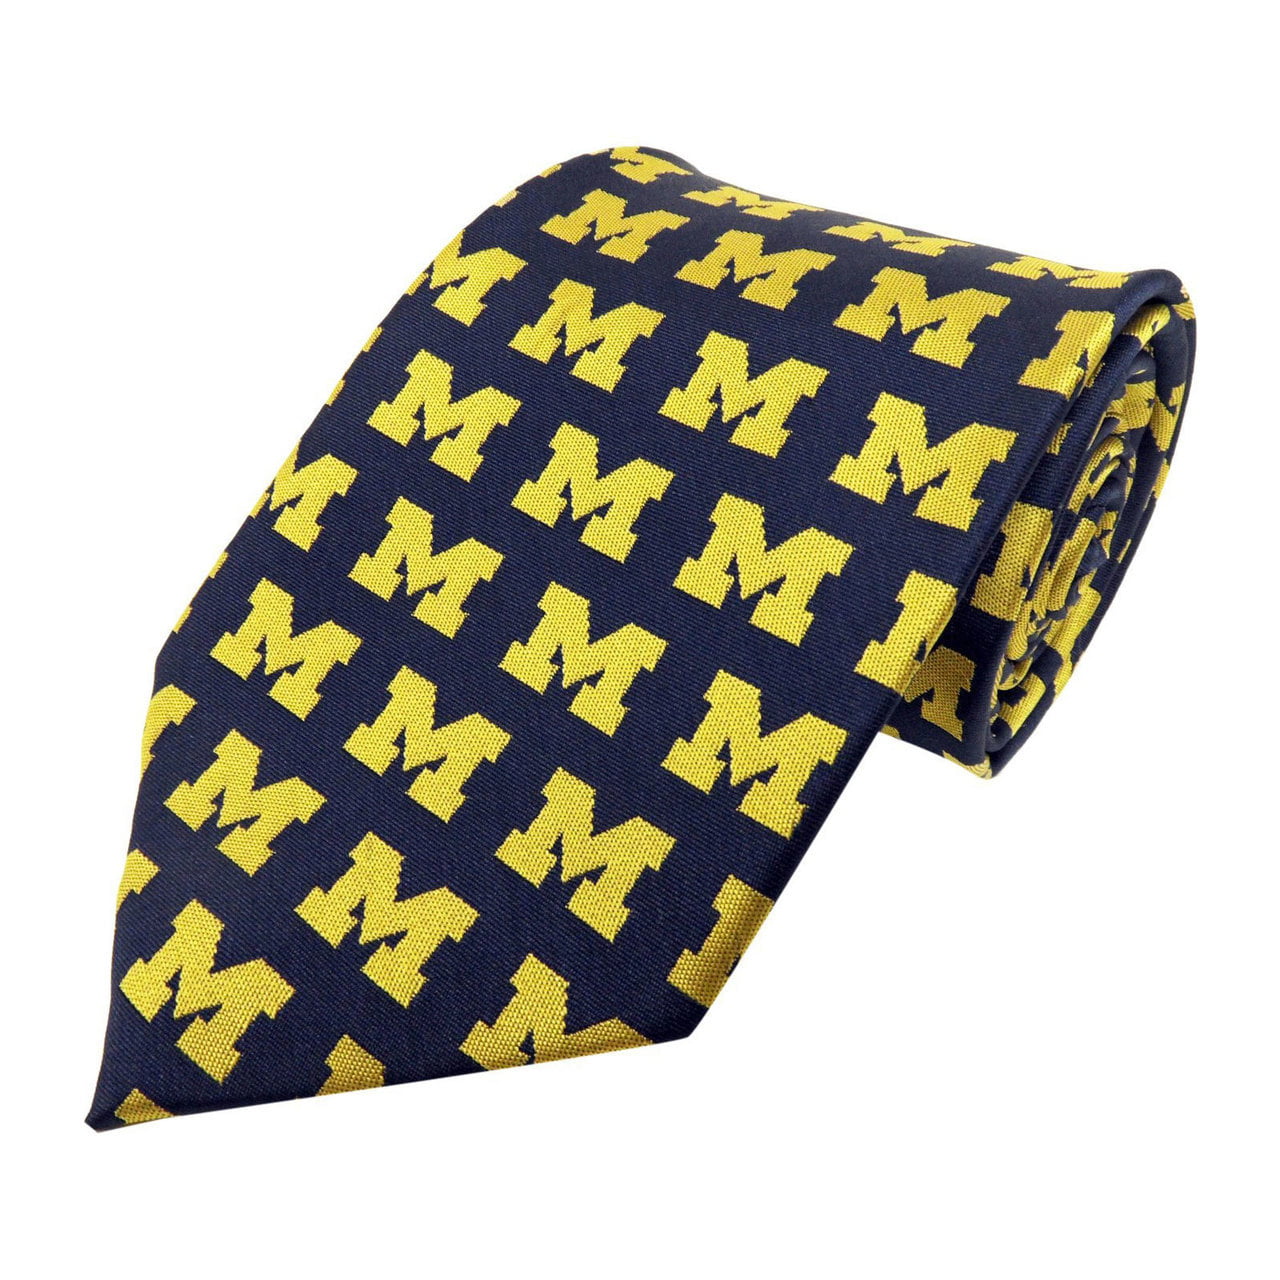 Donegal Bay Officially Licensed NCAA Michigan Wolverines Necktie 